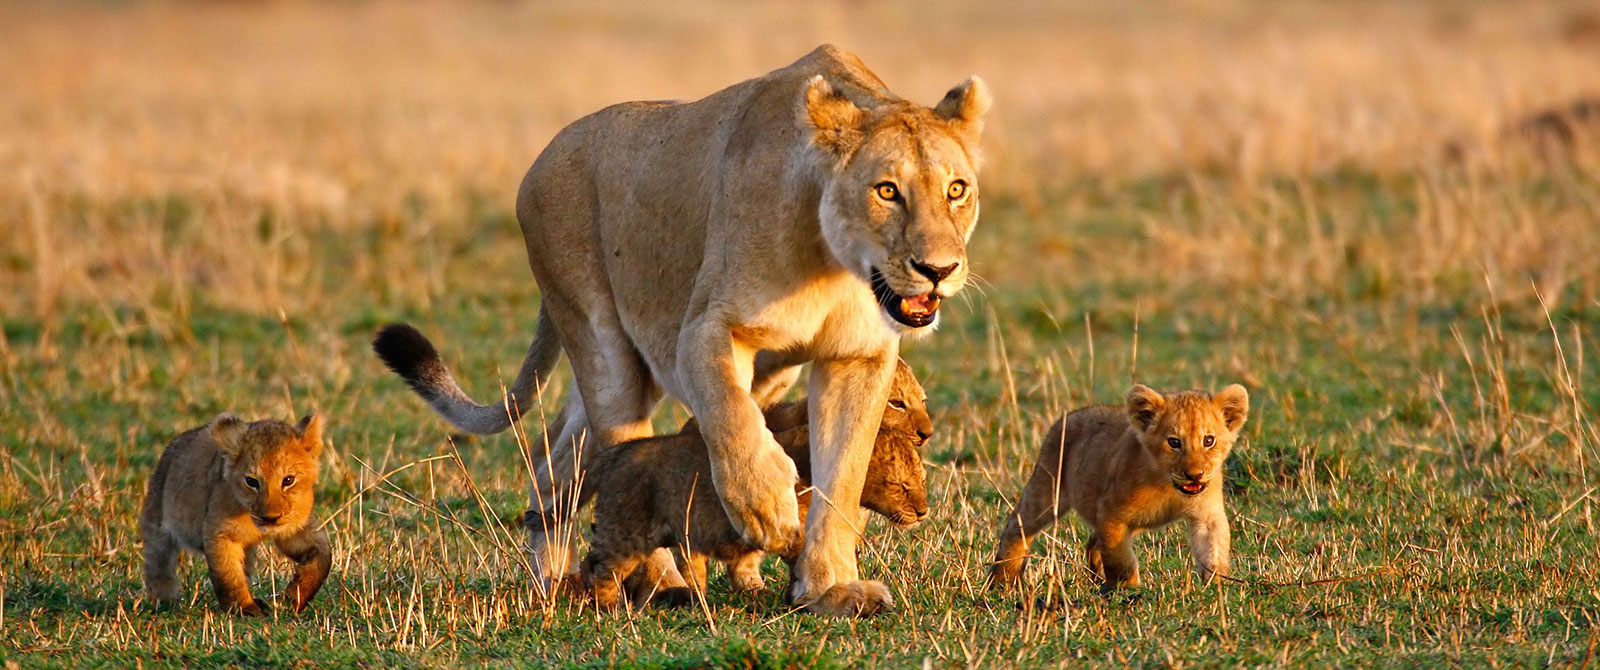 Lioness and Cubs - Best Africa Safari Vacations